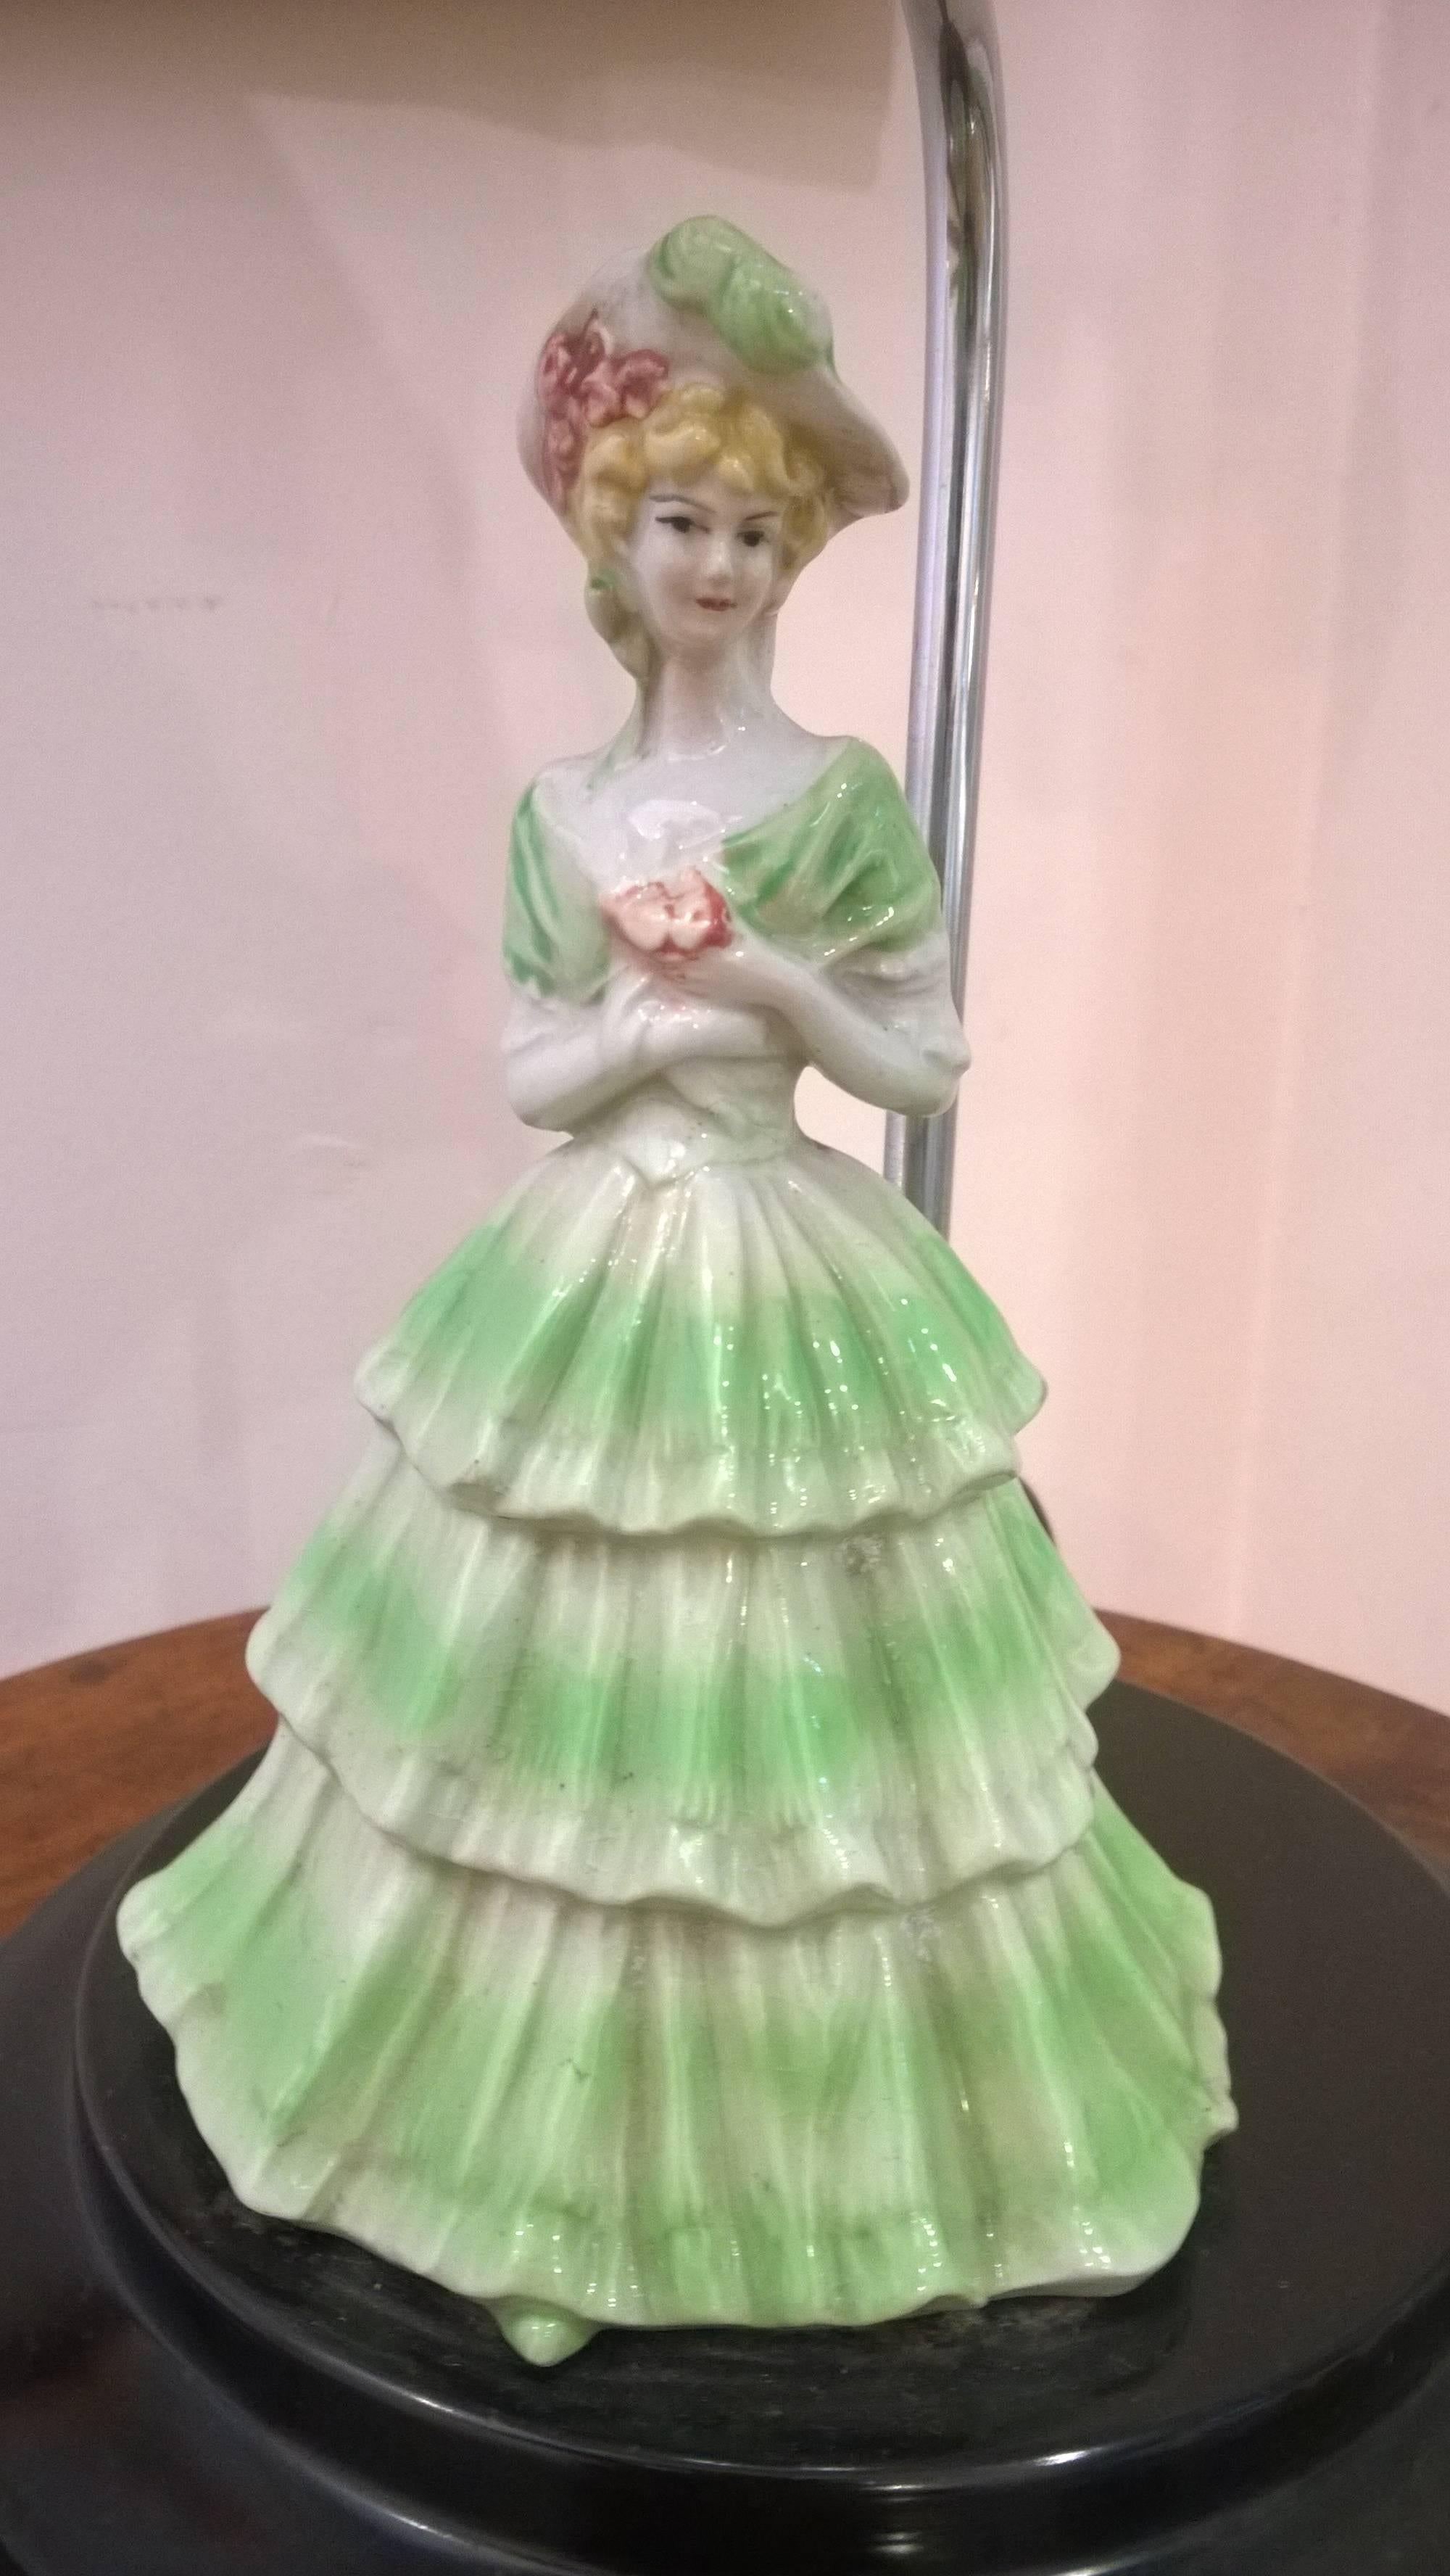 Art Deco table light with Porcelain figurine of a lady, circa 1930. The lampshades are newly handmade silks by the same maker as provides the shades for Downton Abbey. All lights and lamps have been rewired with authentic flex and are Pat tested.